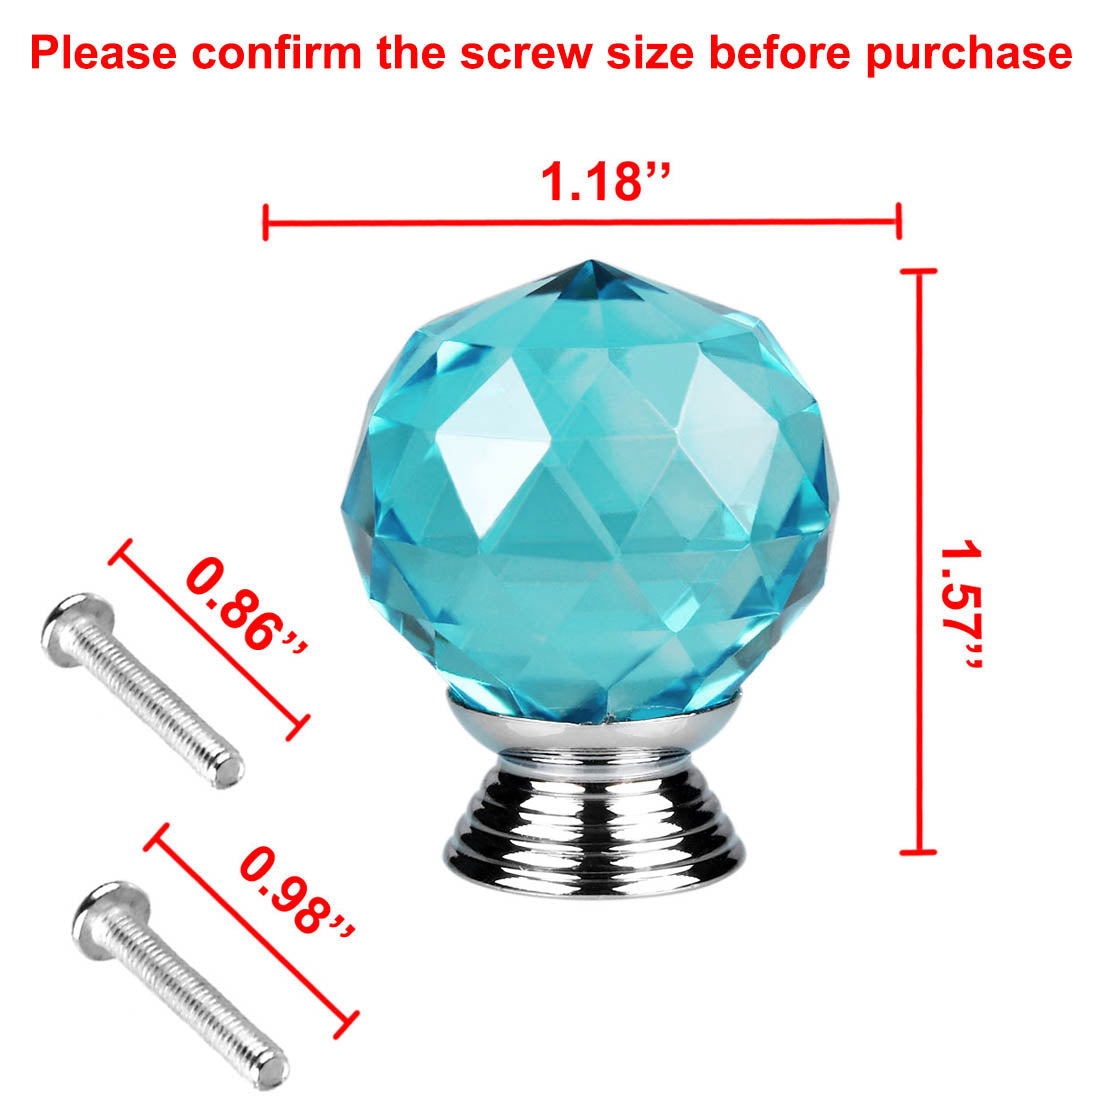 uxcell Uxcell 30mm Crystal Glass Drawer Knobs Cabinet Pull Handle Round Sky Blue 10pcs